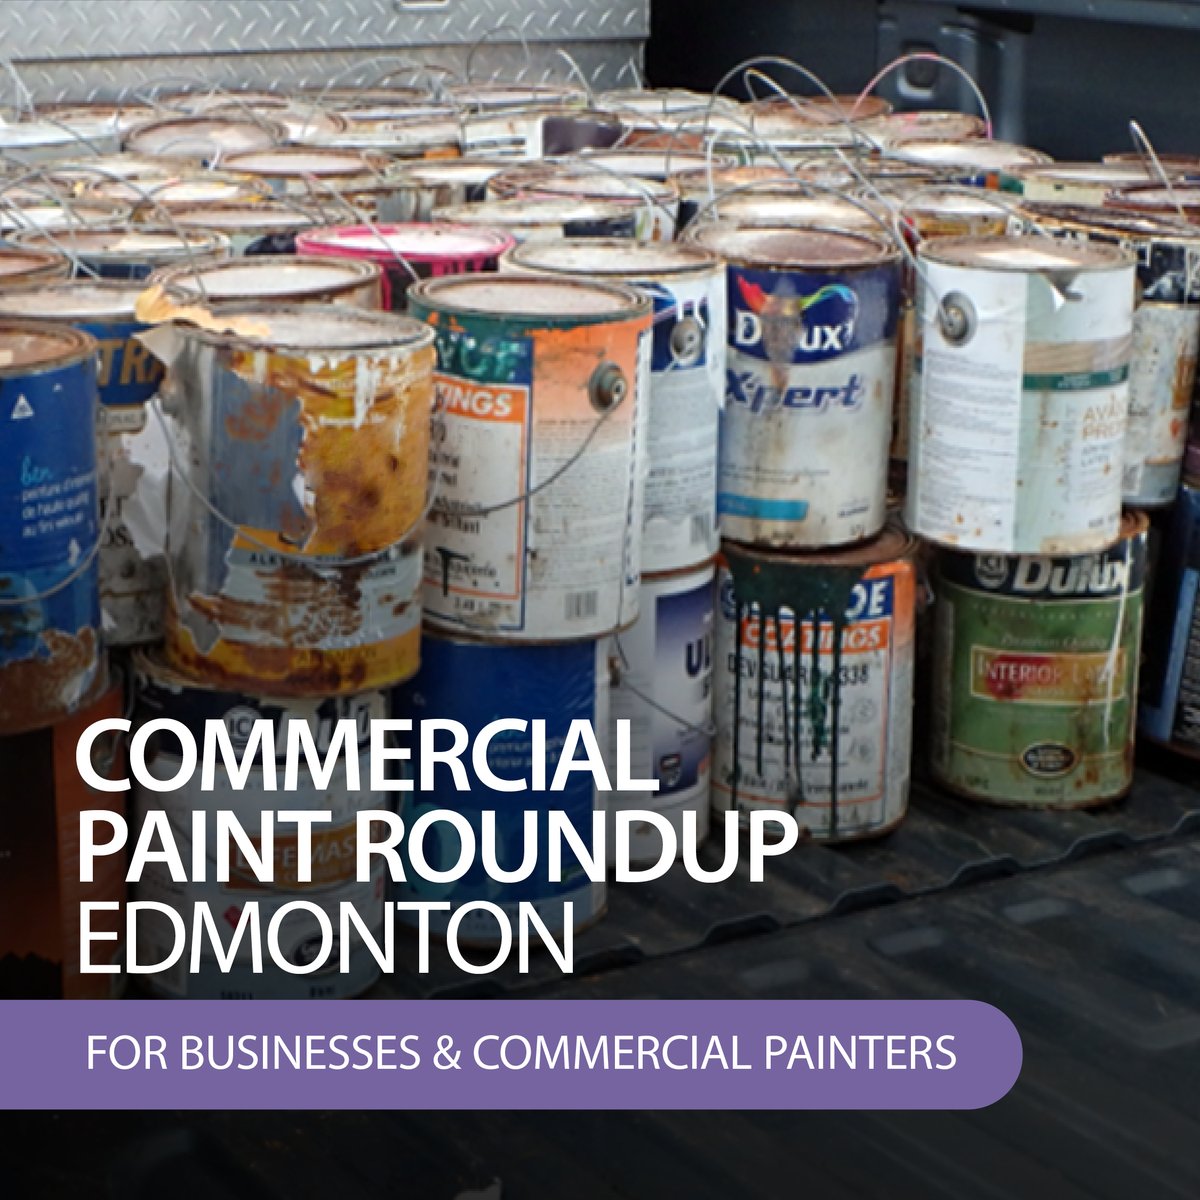 Hey, #YEG #CommercialPainters and #Businesses. Don't forget about our upcoming Commercial Paint Roundup! Bring your leftover #paint, empty paint cans, and spray paint and we will #recycle them for free! Learn more: bit.ly/49ZP8d0 #Edmonton #Painters